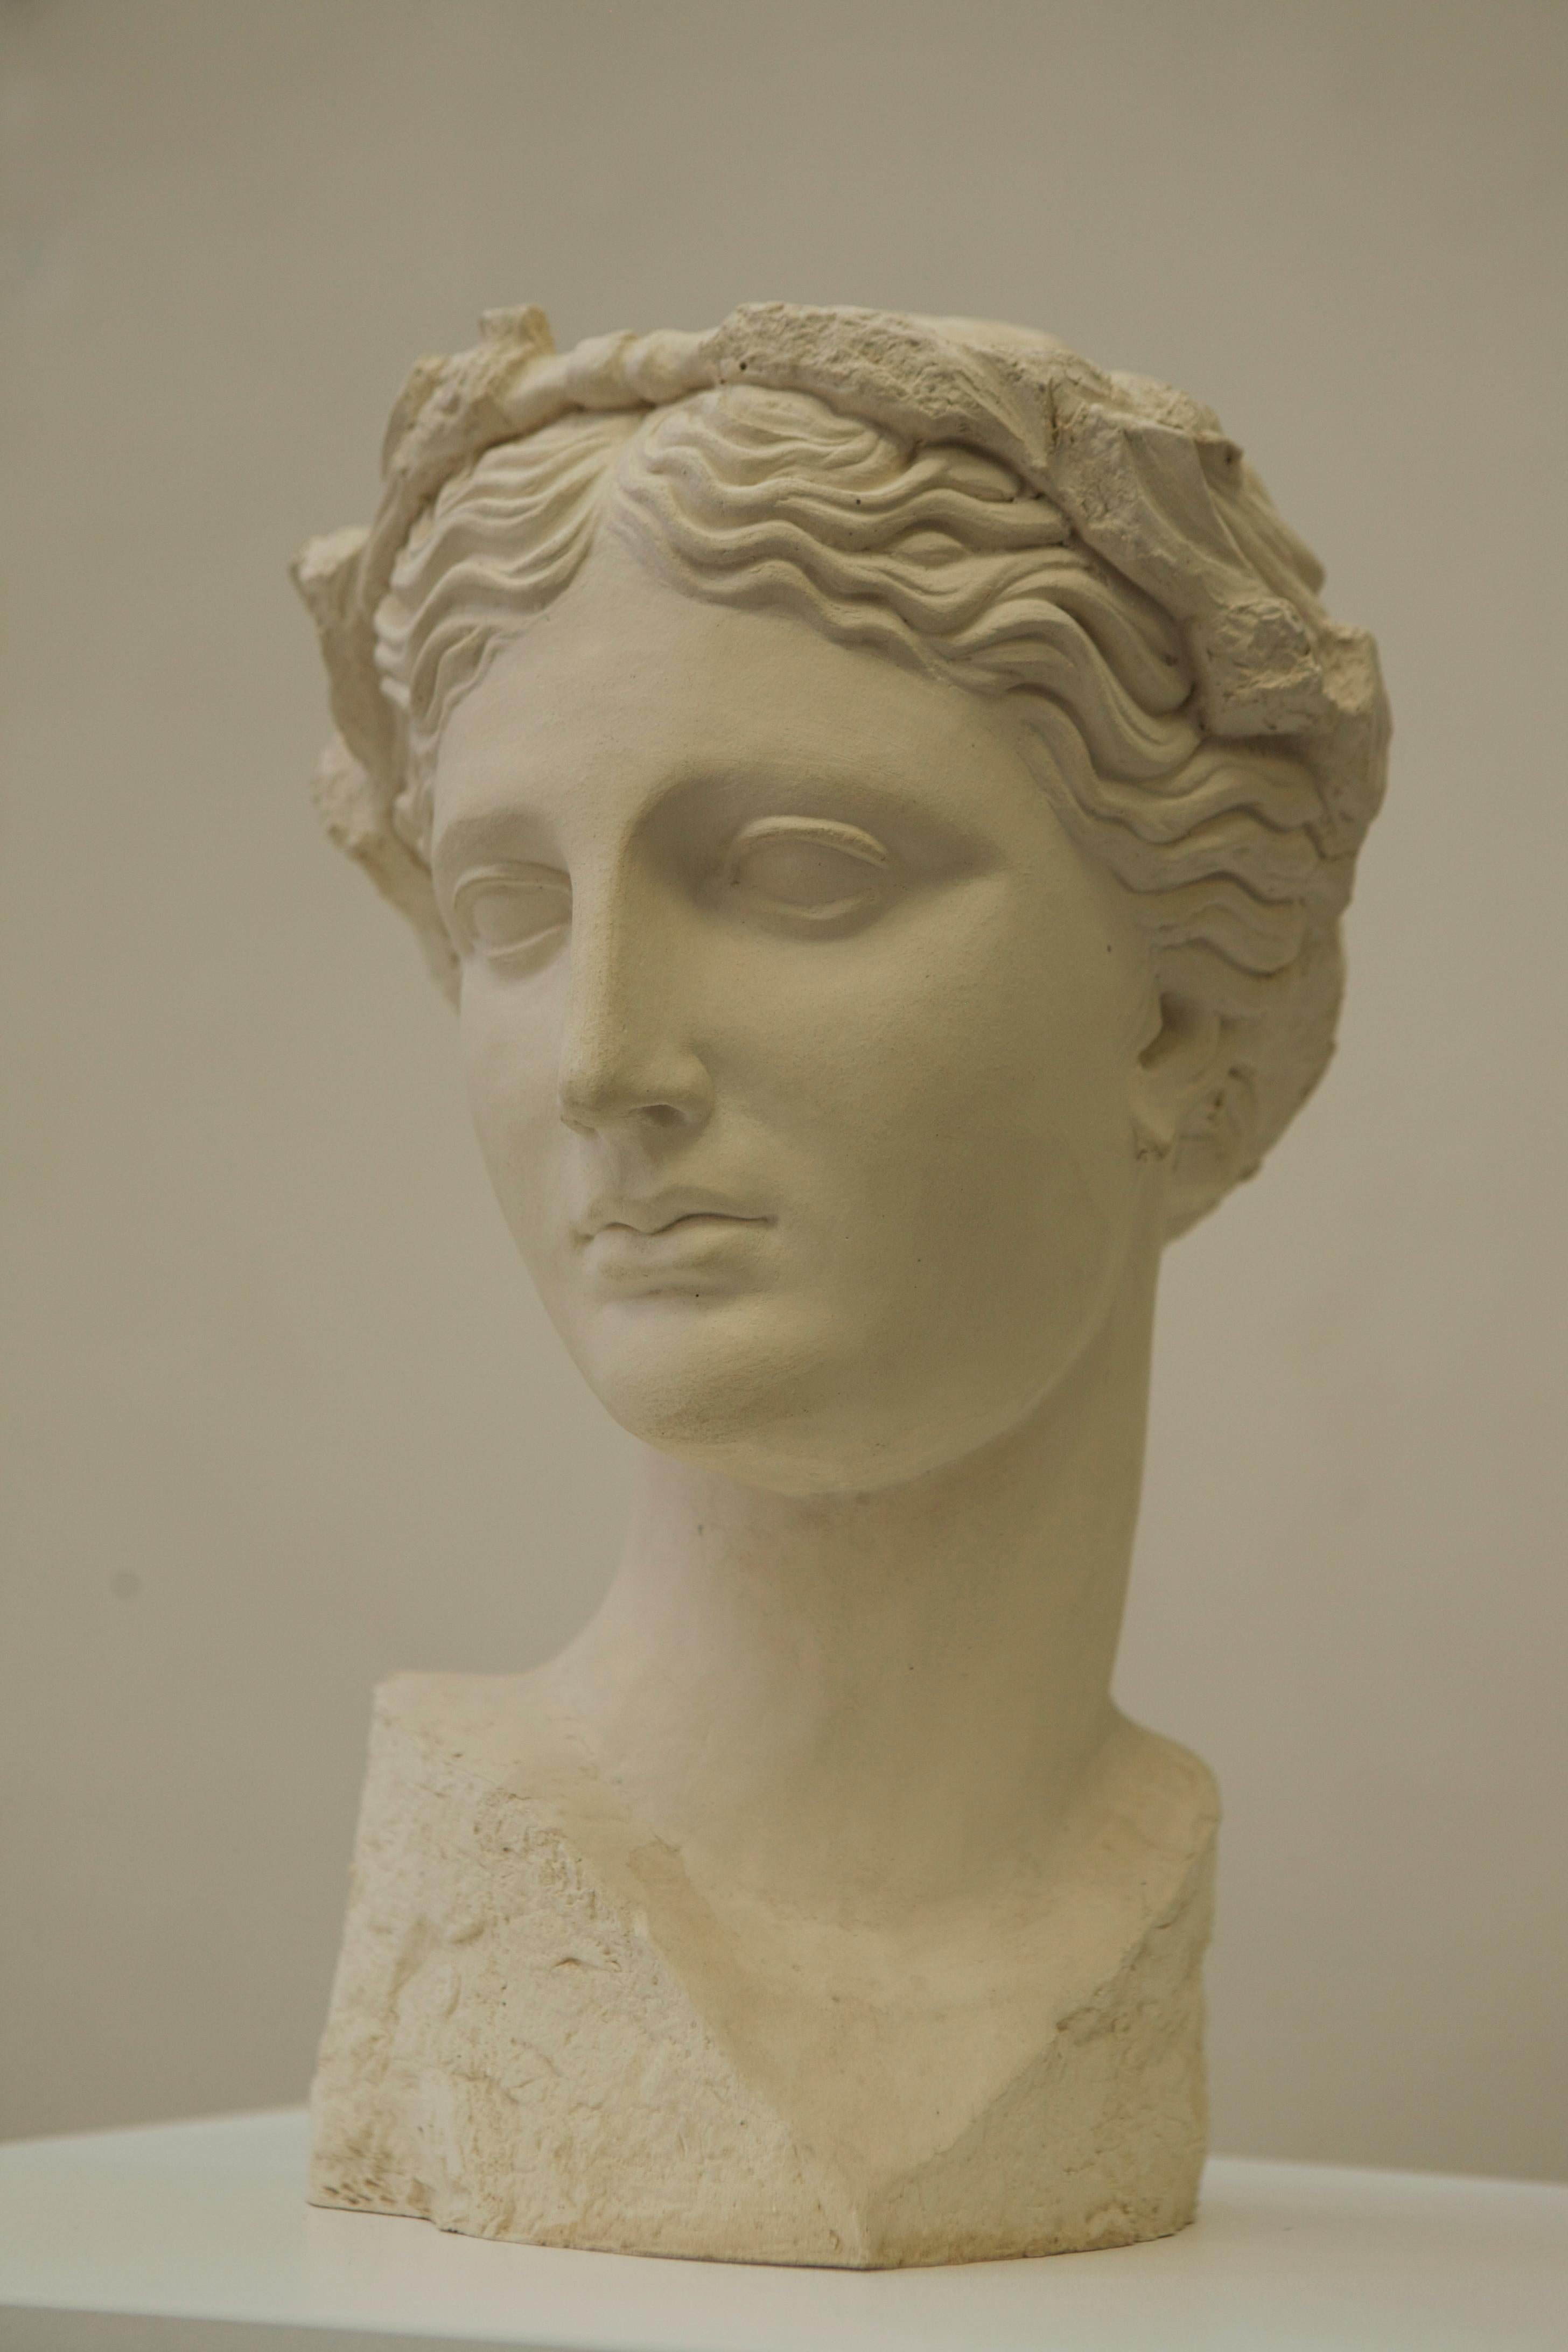 Thalia, one of the Three Graces, frequently appears alongside her sisters in Neoclassical sculptures. She is known to symbolize youth and beauty.

The Coade Head of Thalia draws inspiration from a 2nd-century Roman bust that bears resemblance to